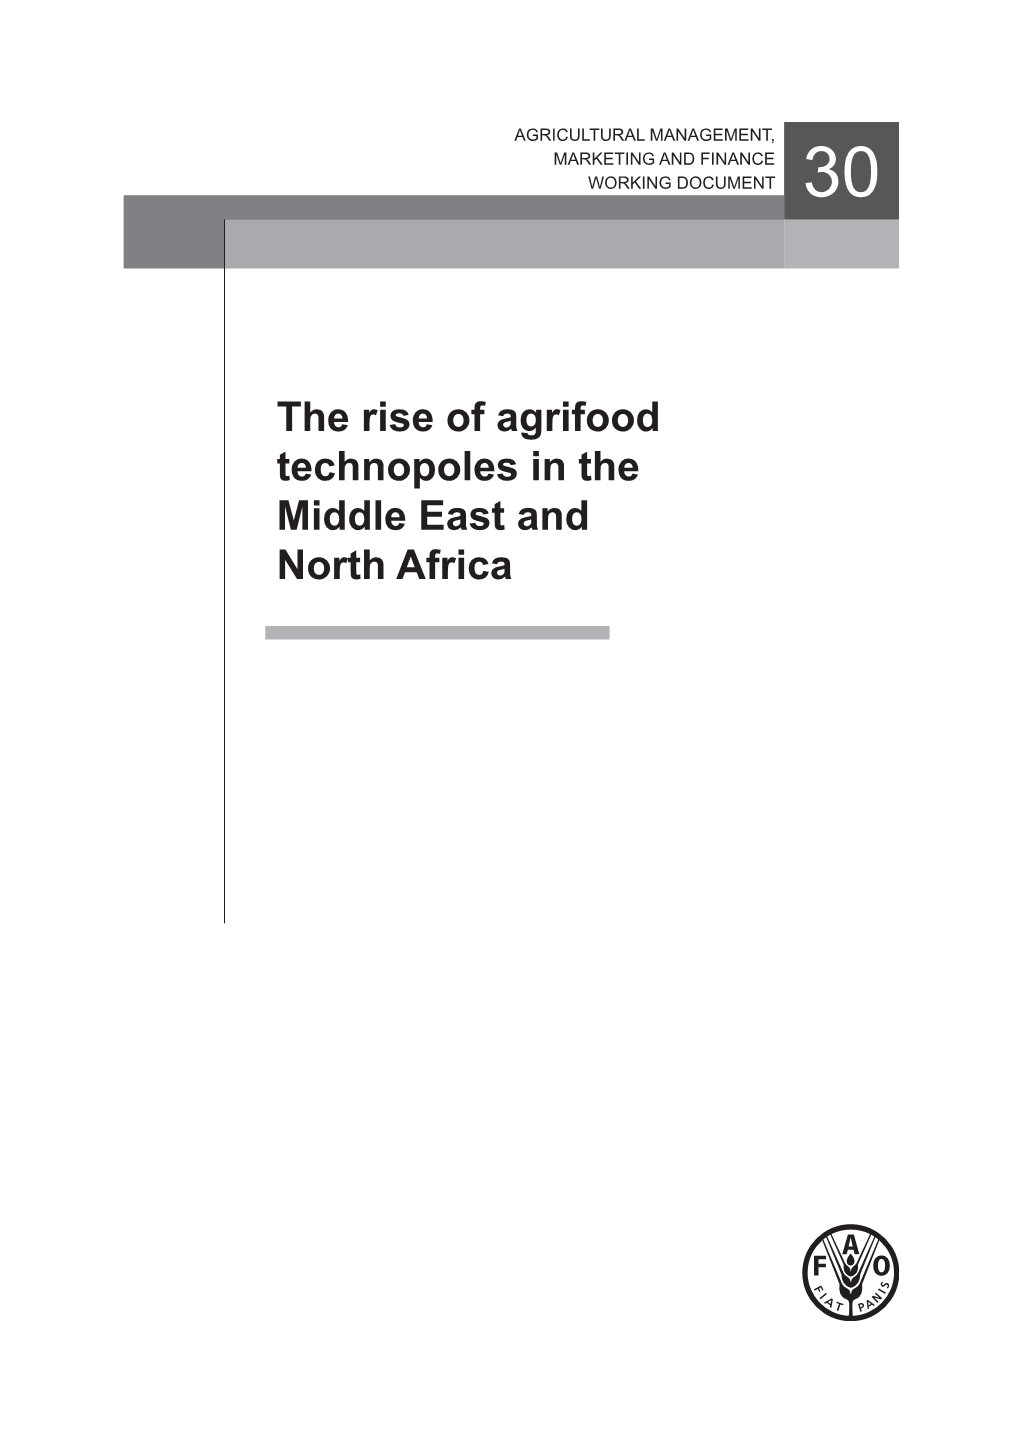 The Rise of Agrifood Technopoles in the Middle East and North Africa AGRICULTURAL Management, Marketing and Finance WORKING DOCUMENT 30